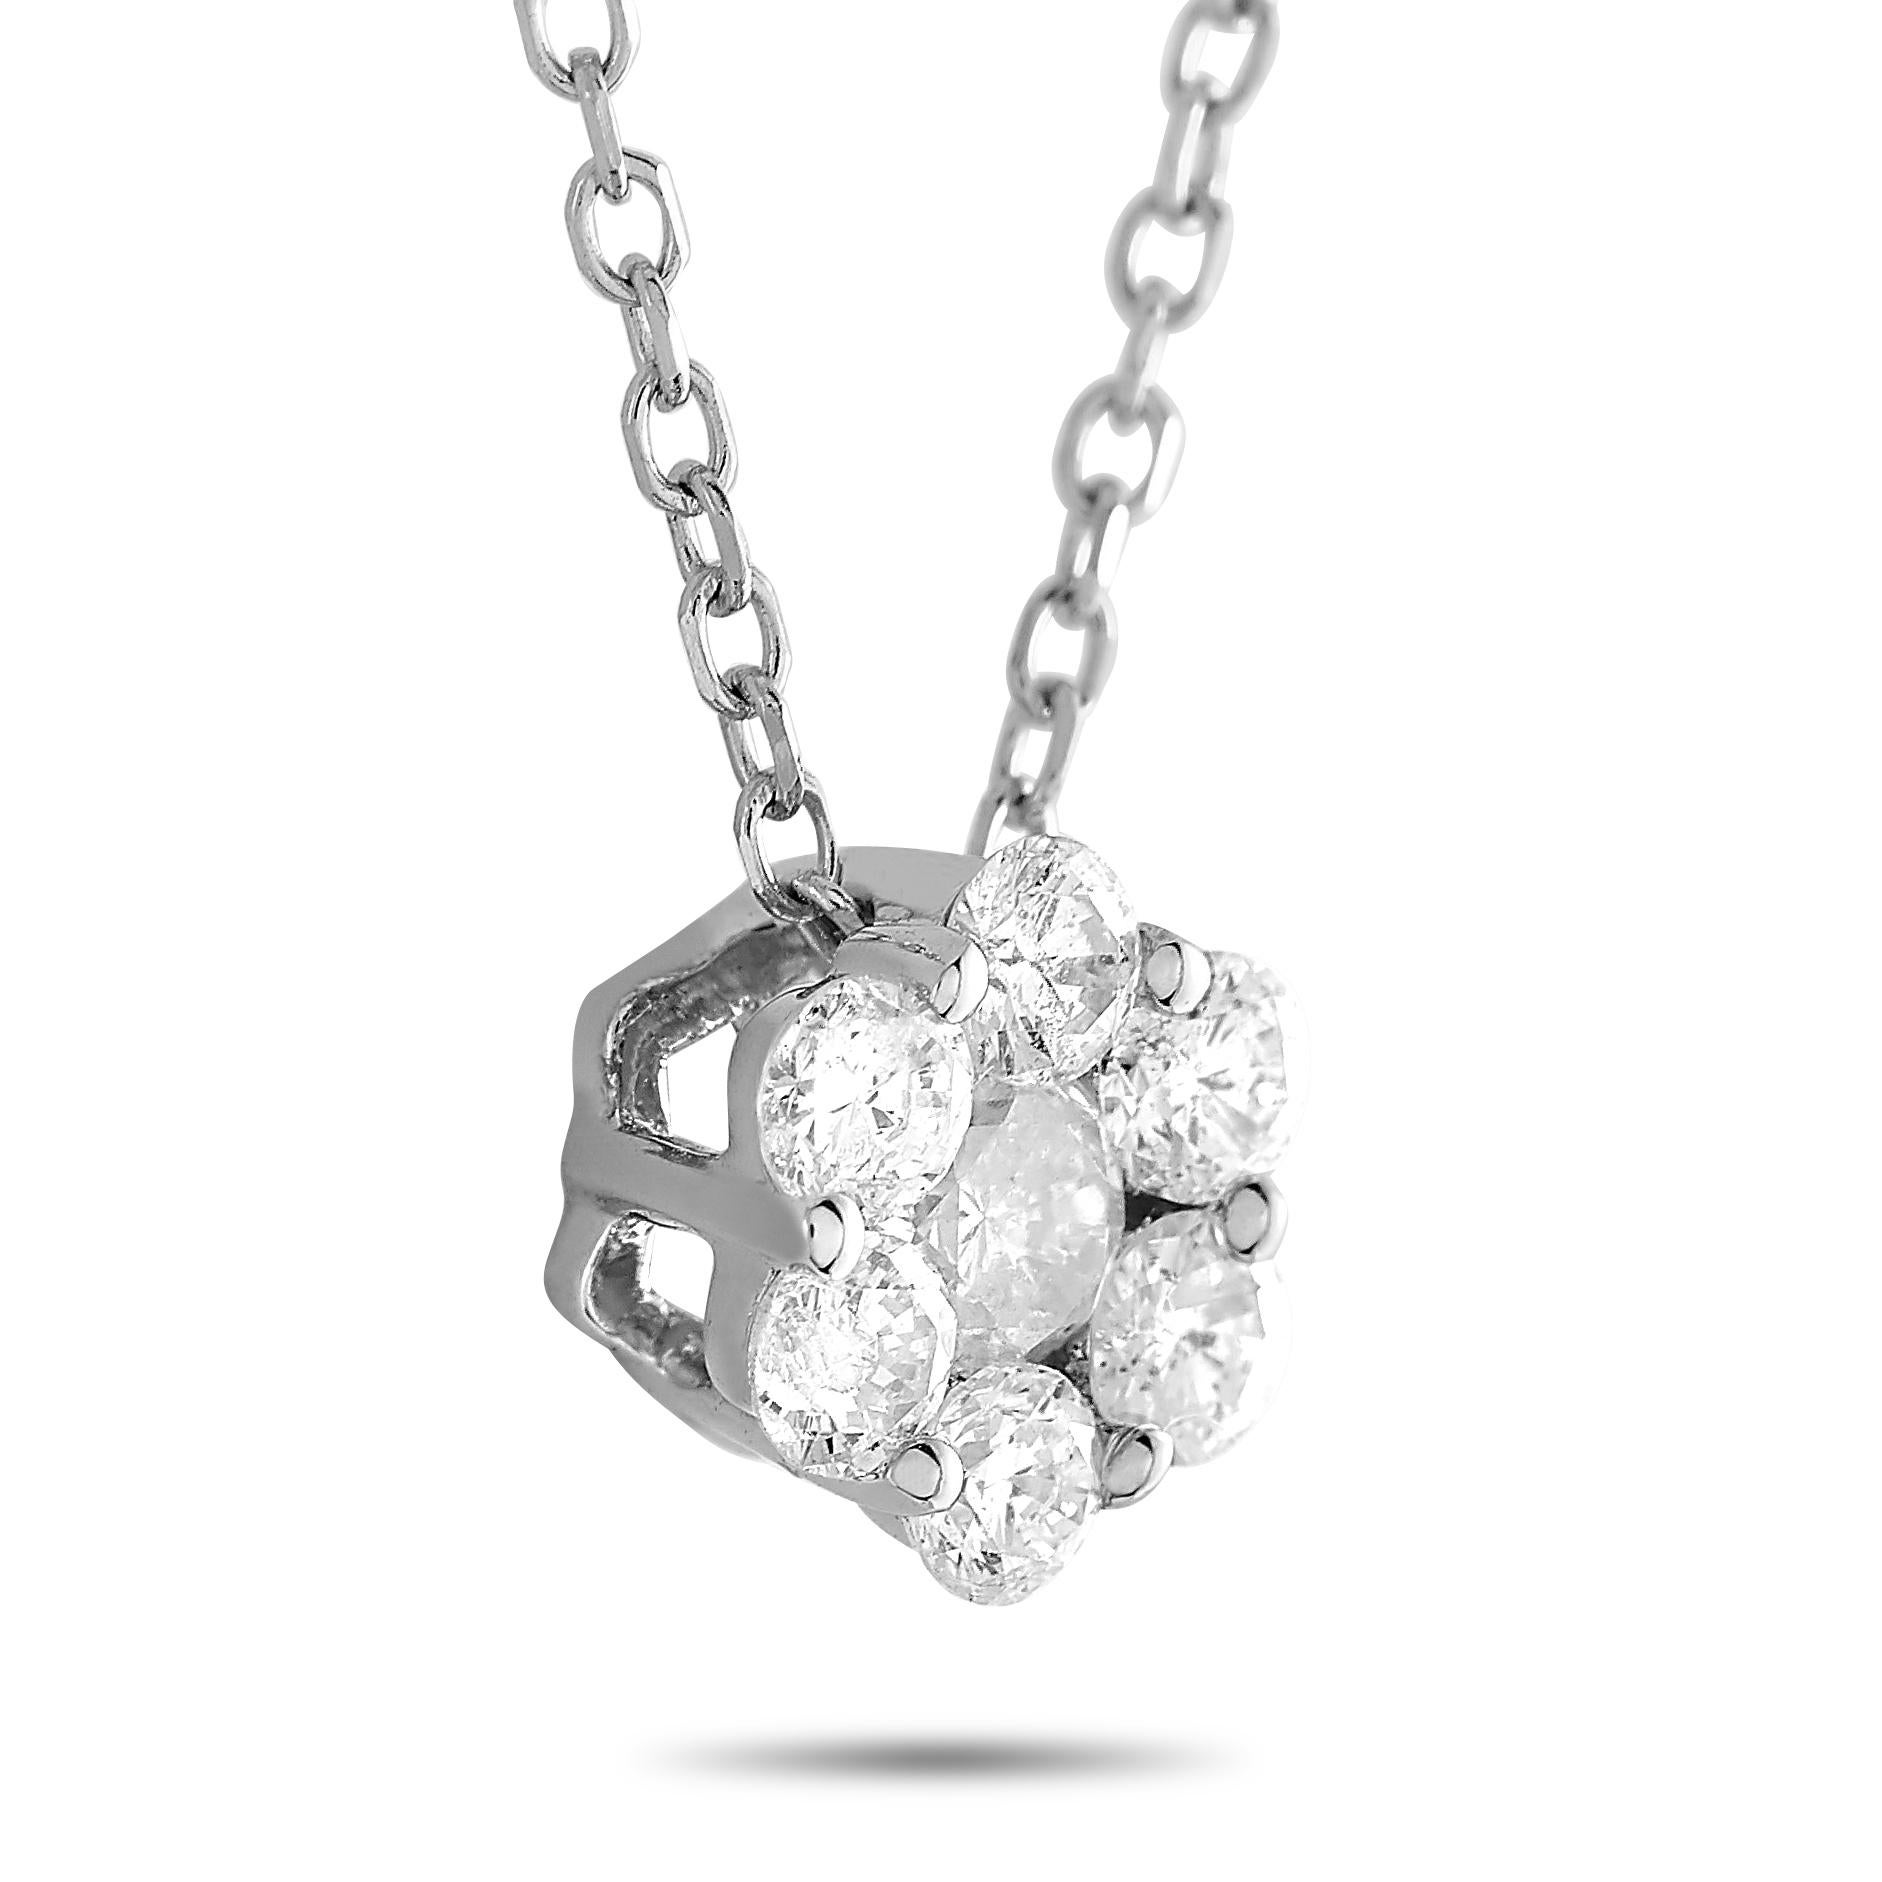 This LB Exclusive necklace is crafted from 14K white gold and weighs 1.2 grams. It is presented with a 15” chain and a pendant that measures 0.25” in length and 0.25” in width. The necklace is embellished with diamonds that total 0.25 carats.
 
